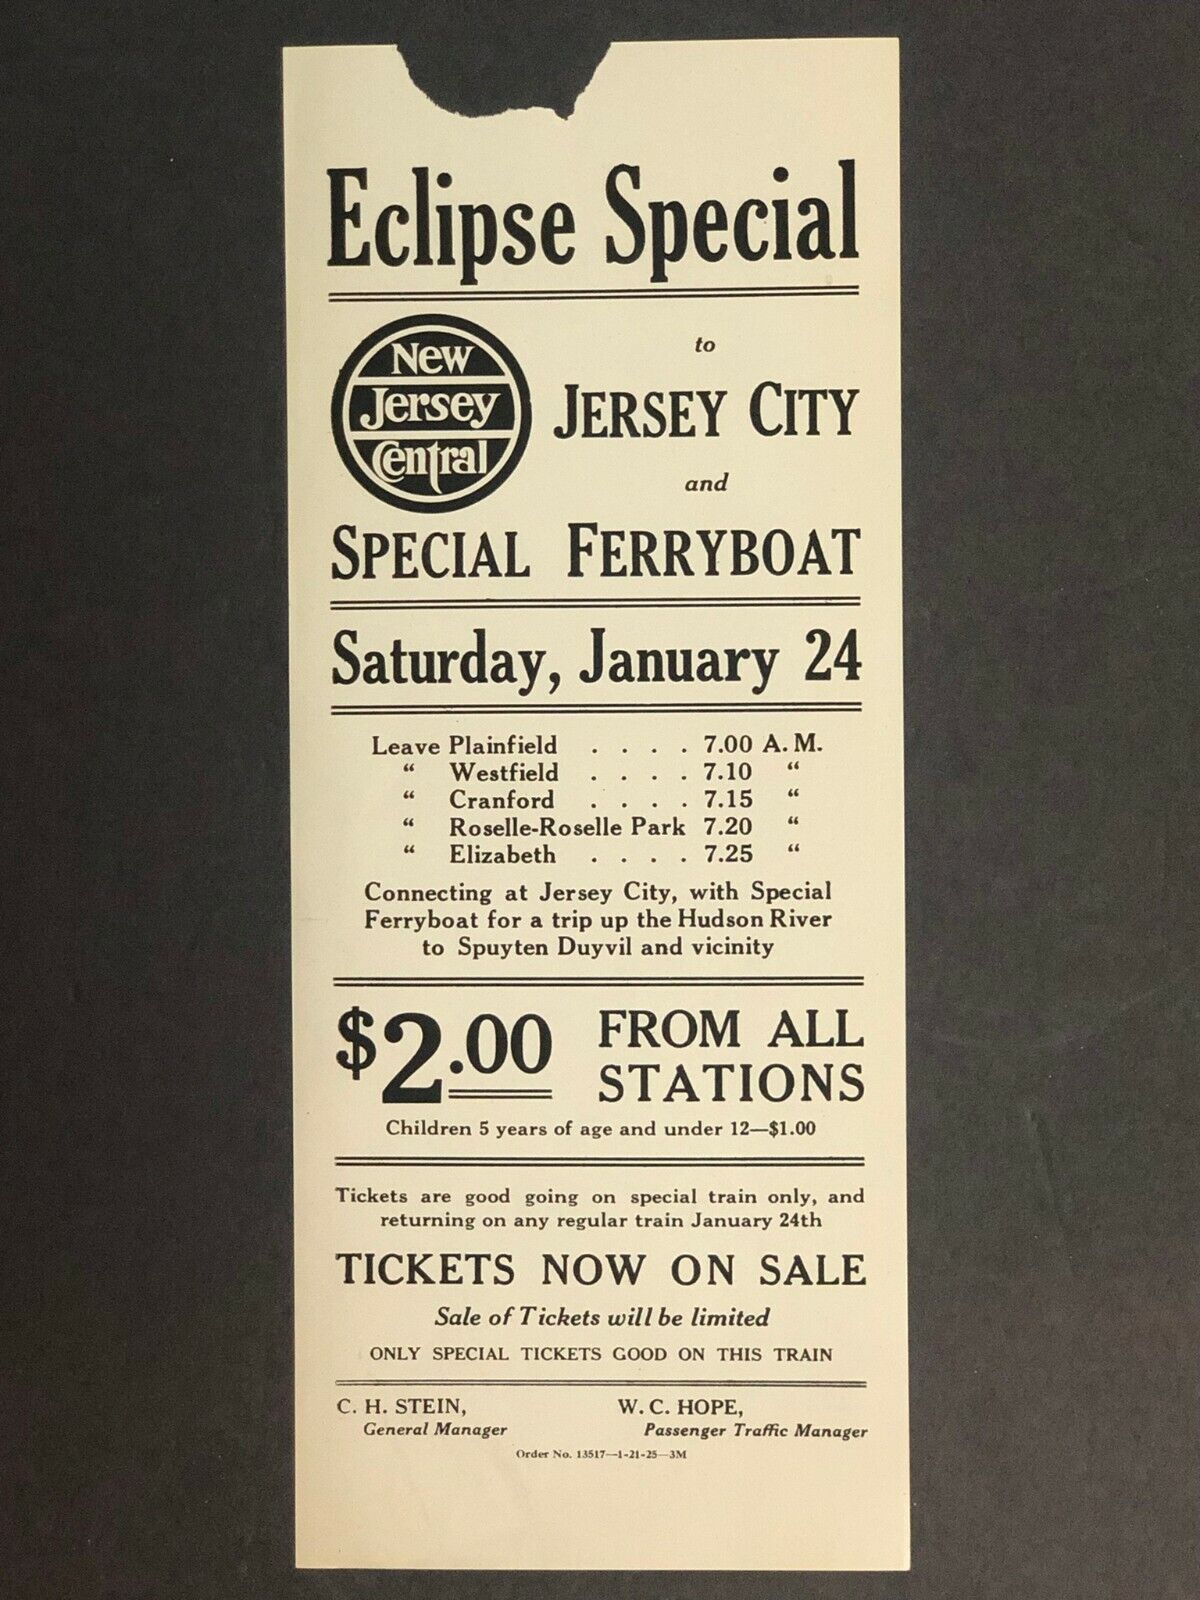 Vintage c1925 New Jersey Central RR Eclipse Special City Special Ferryboat